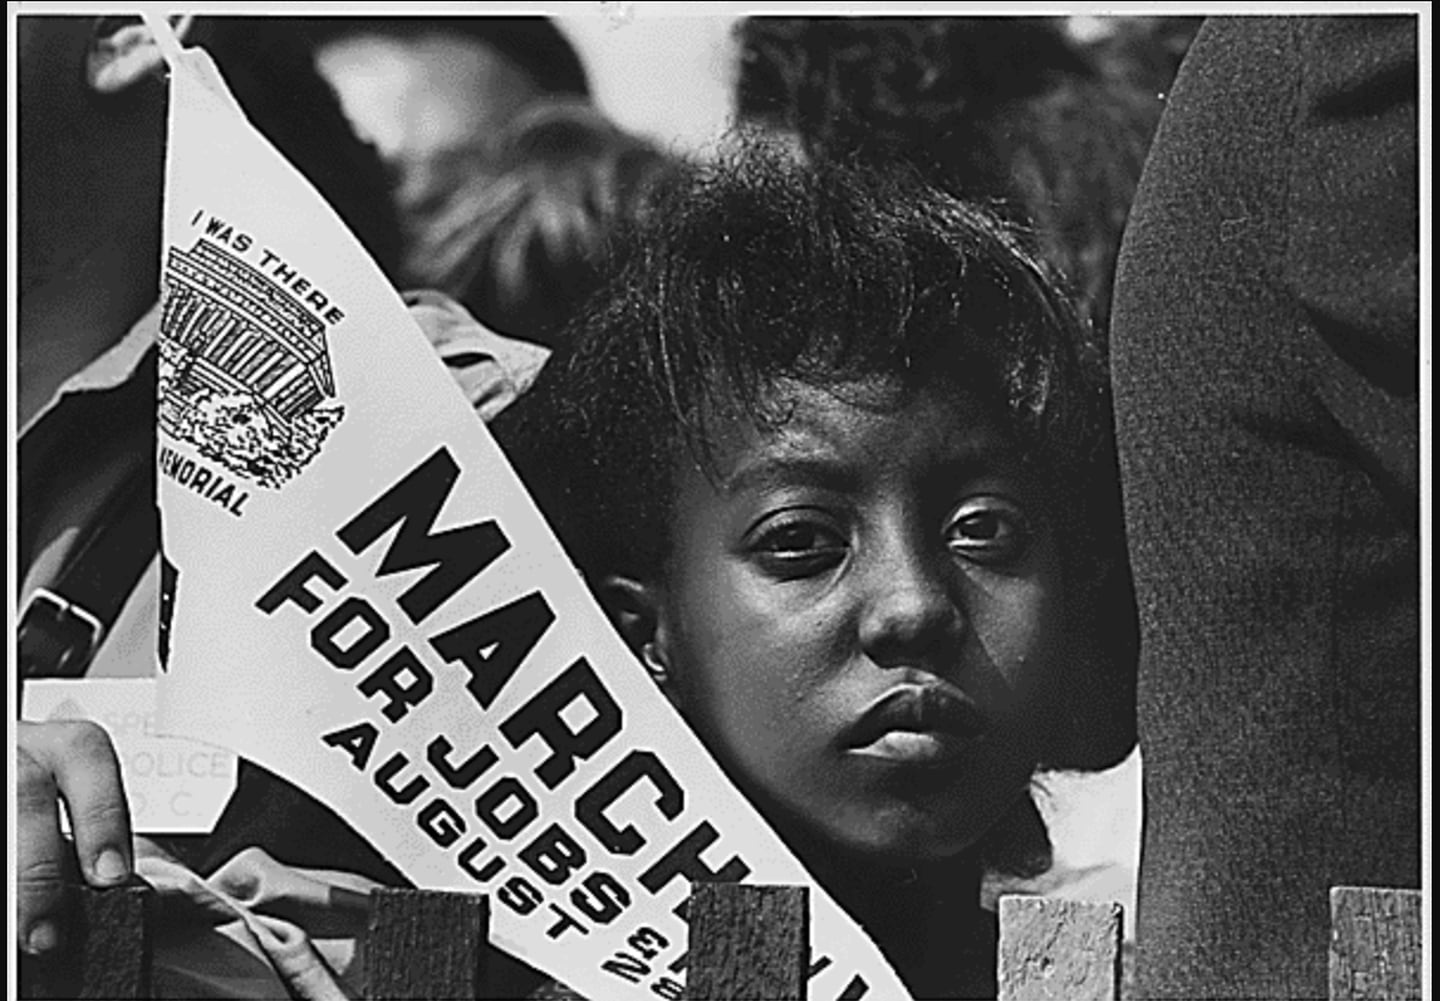 Edith Lee-Payne at the March on Washington in 1963 at age 12.